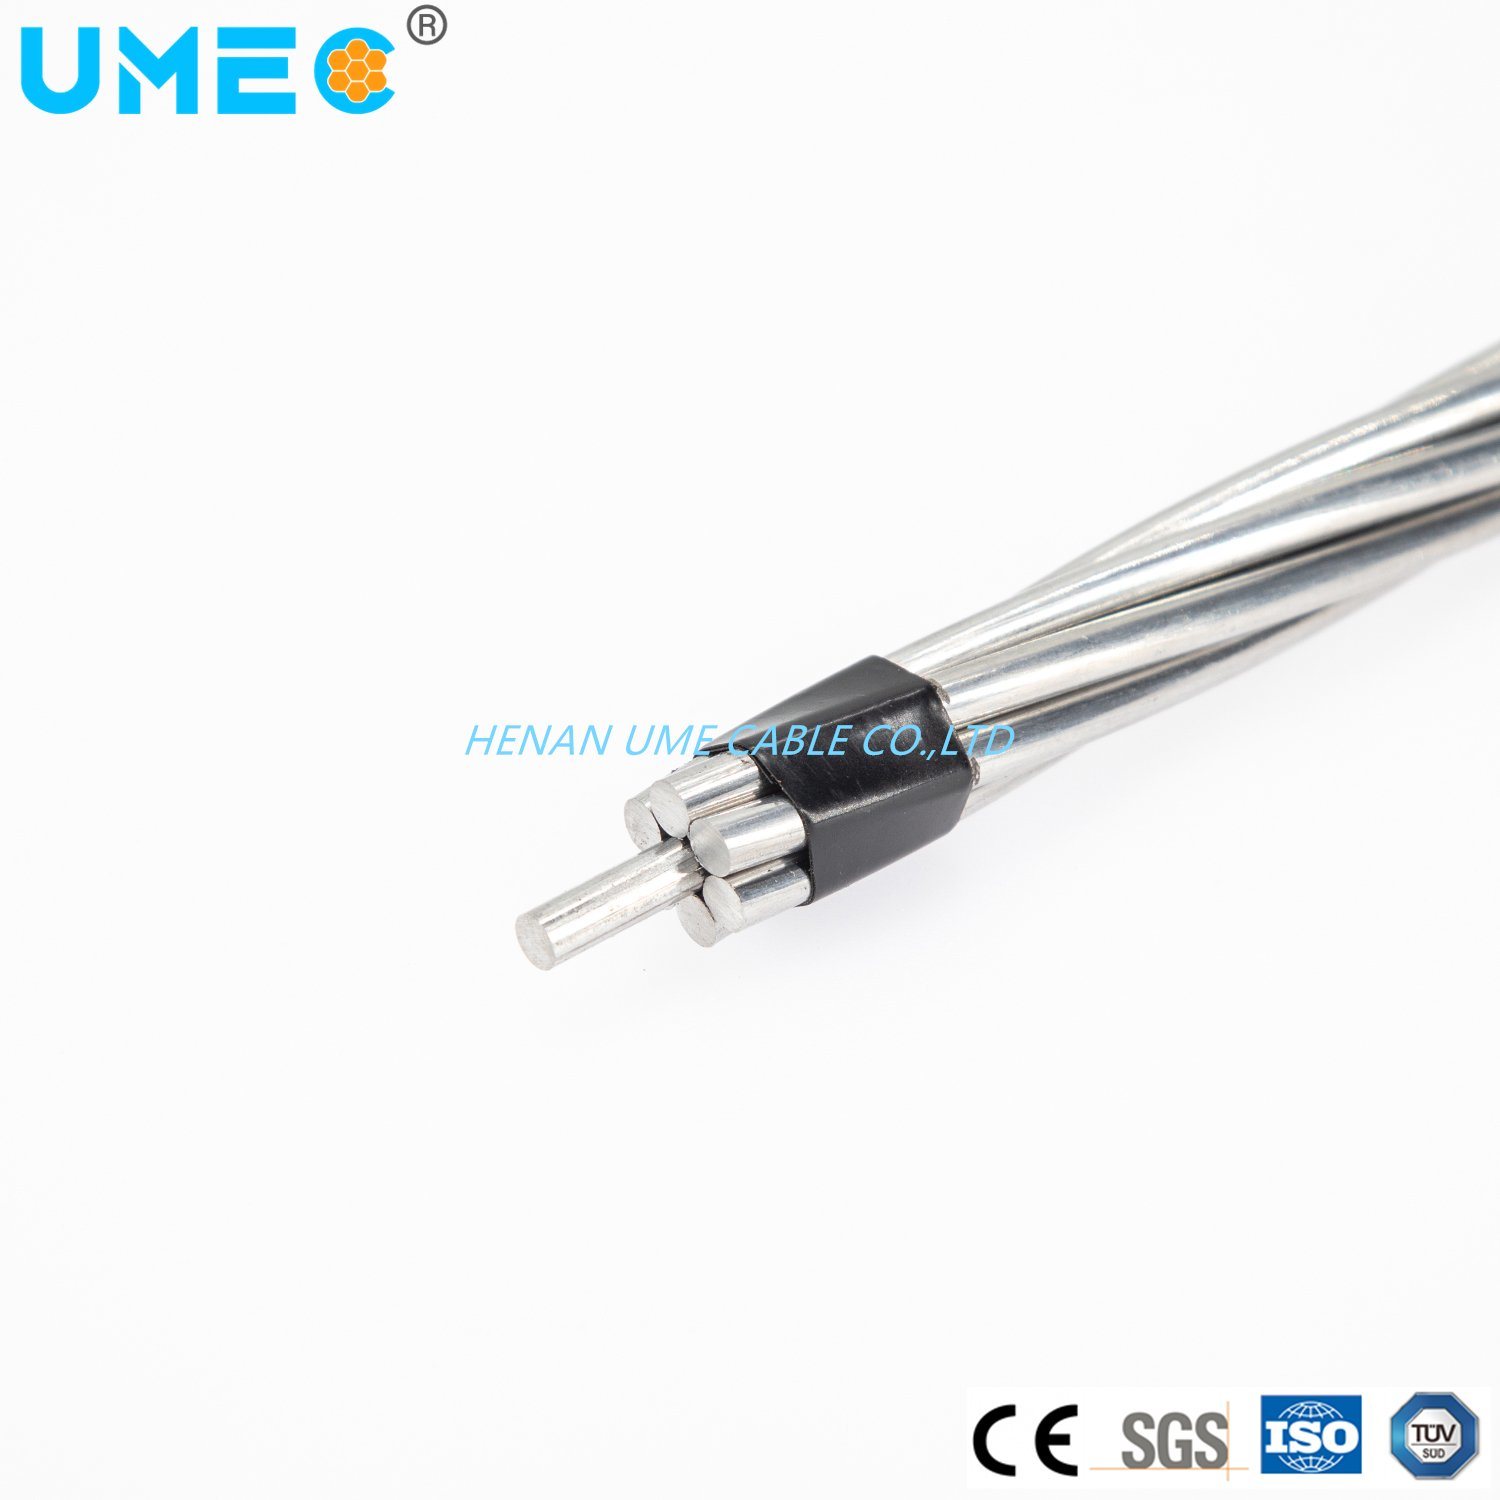 IEC 61089 Standard 7/1.83 7/2.29 7/2.89 7/3.63 Stranded 16sqmm up to 1250sqmm Aluminum Bare Conductor AAAC Conductor